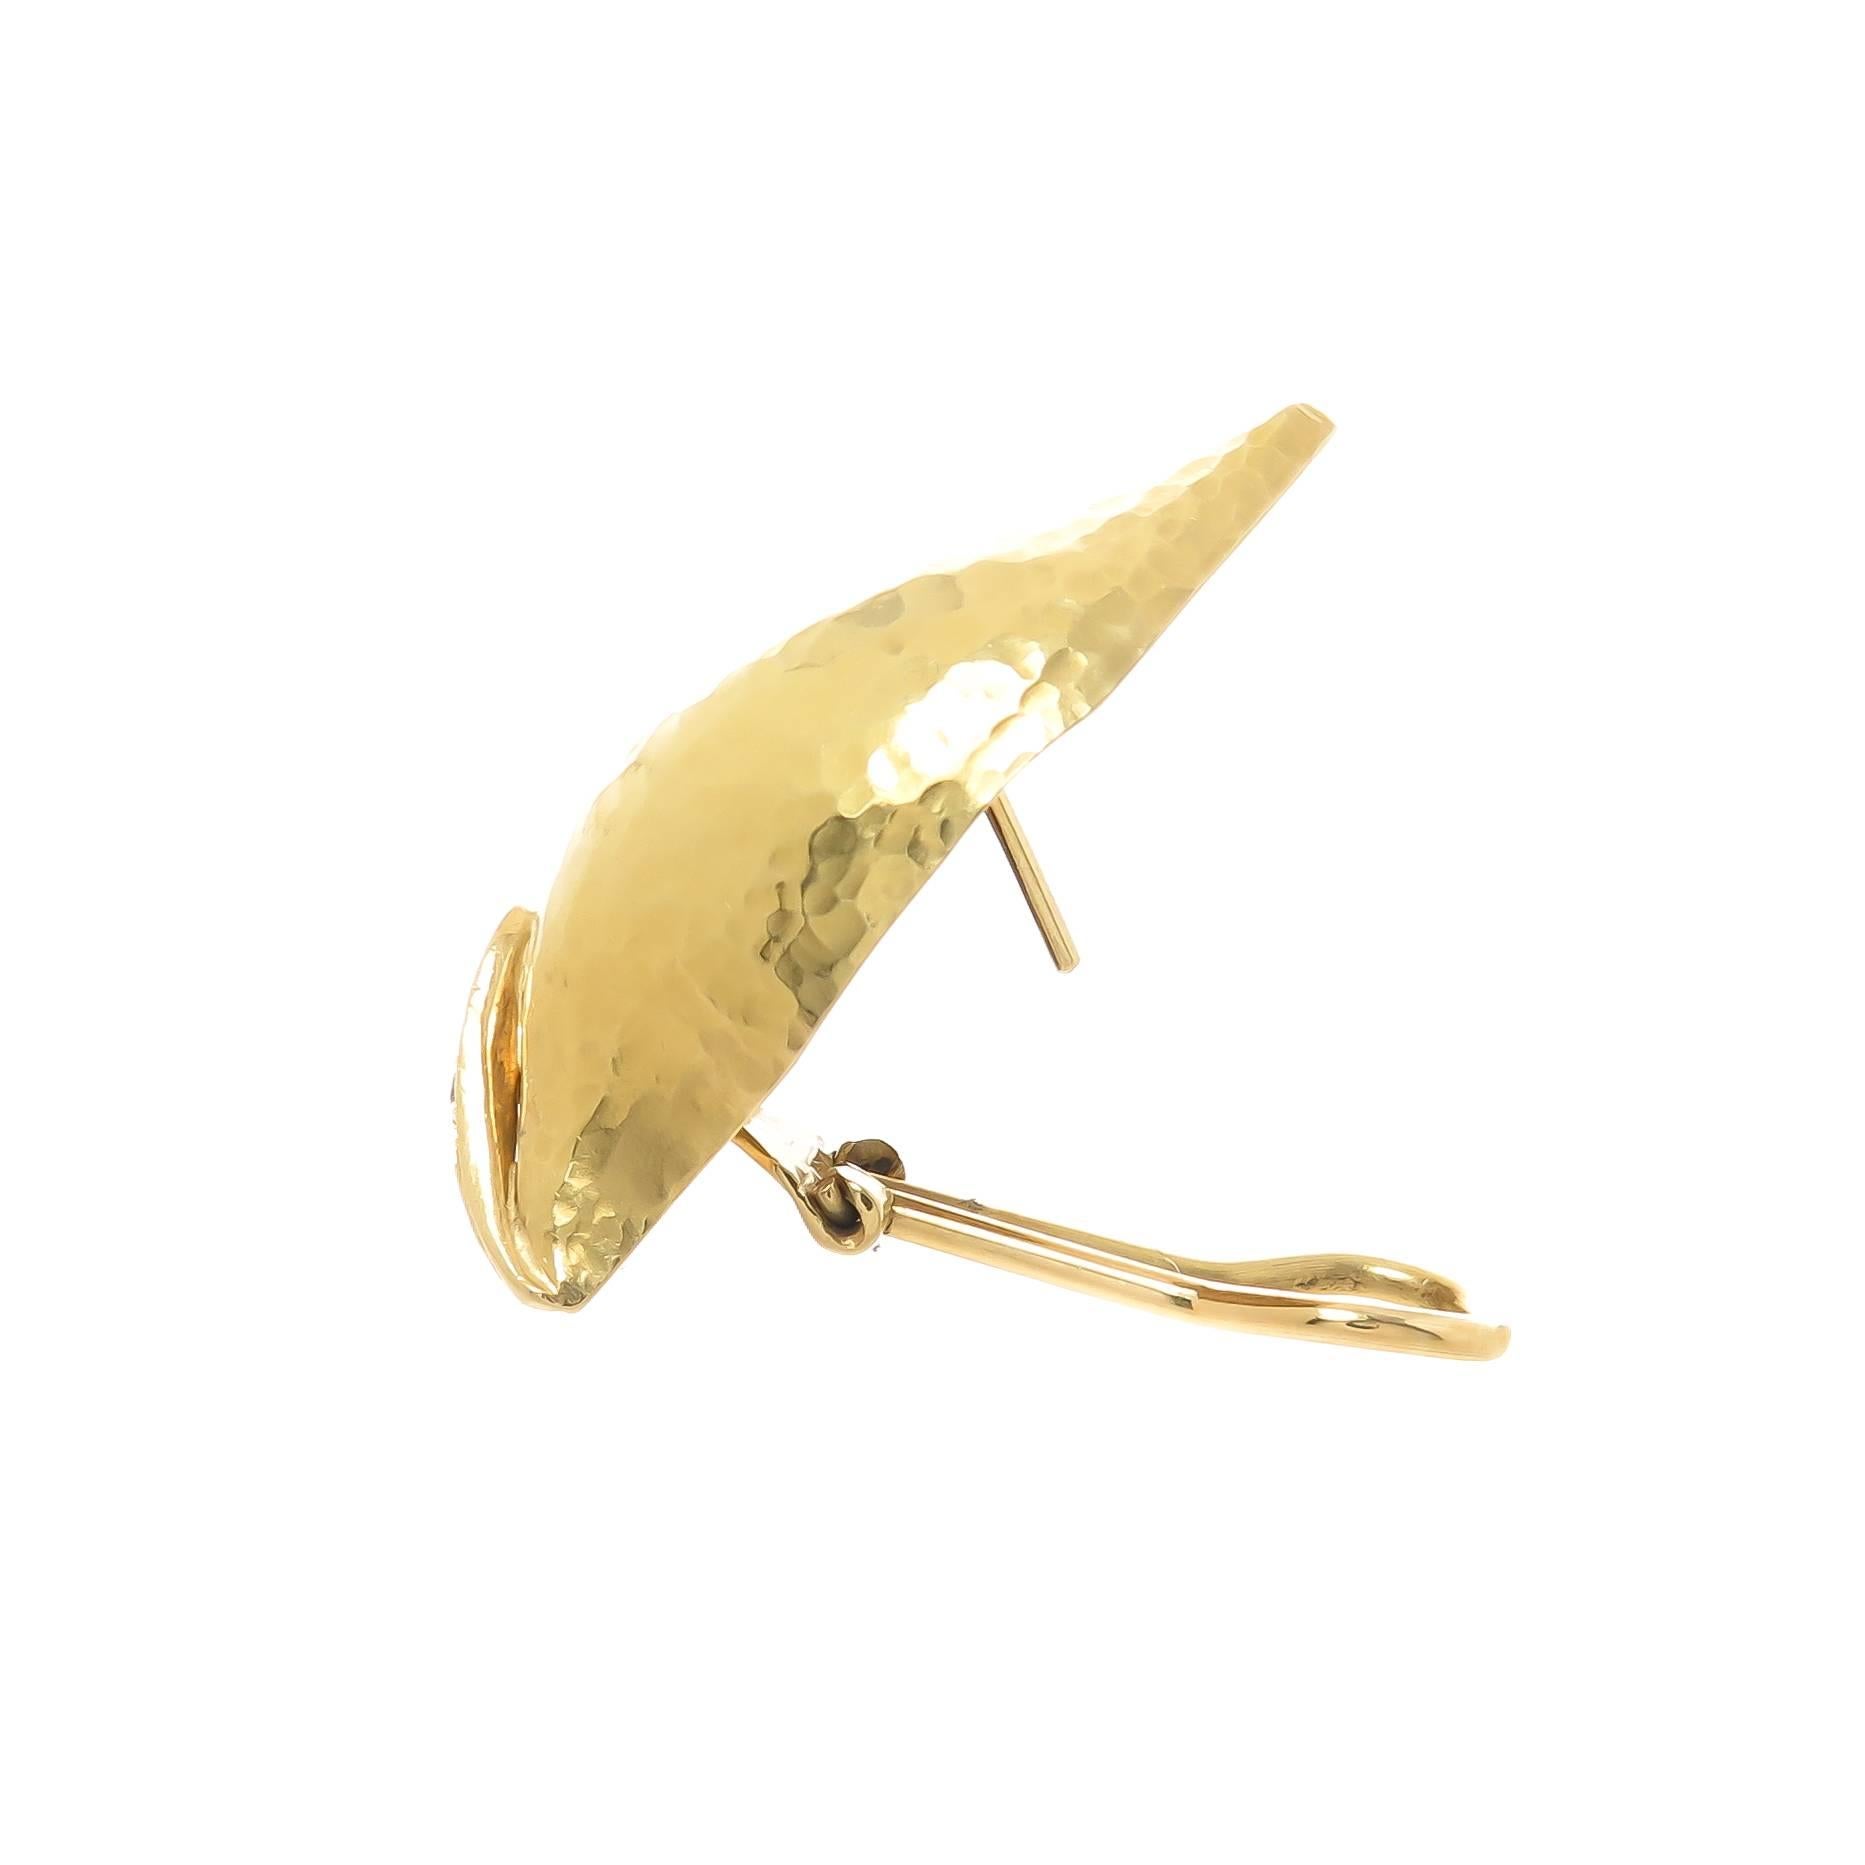 Circa 1990 Paloma Picasso for Tiffany & Company 18K yellow Gold Hand Hammered leaf Earrings, measuring 1 1/2 inch in length and 1/2 inch wide. Set with Round Brilliant cut Diamonds totaling .25 Carat. Having omega clip backs to which a post can be